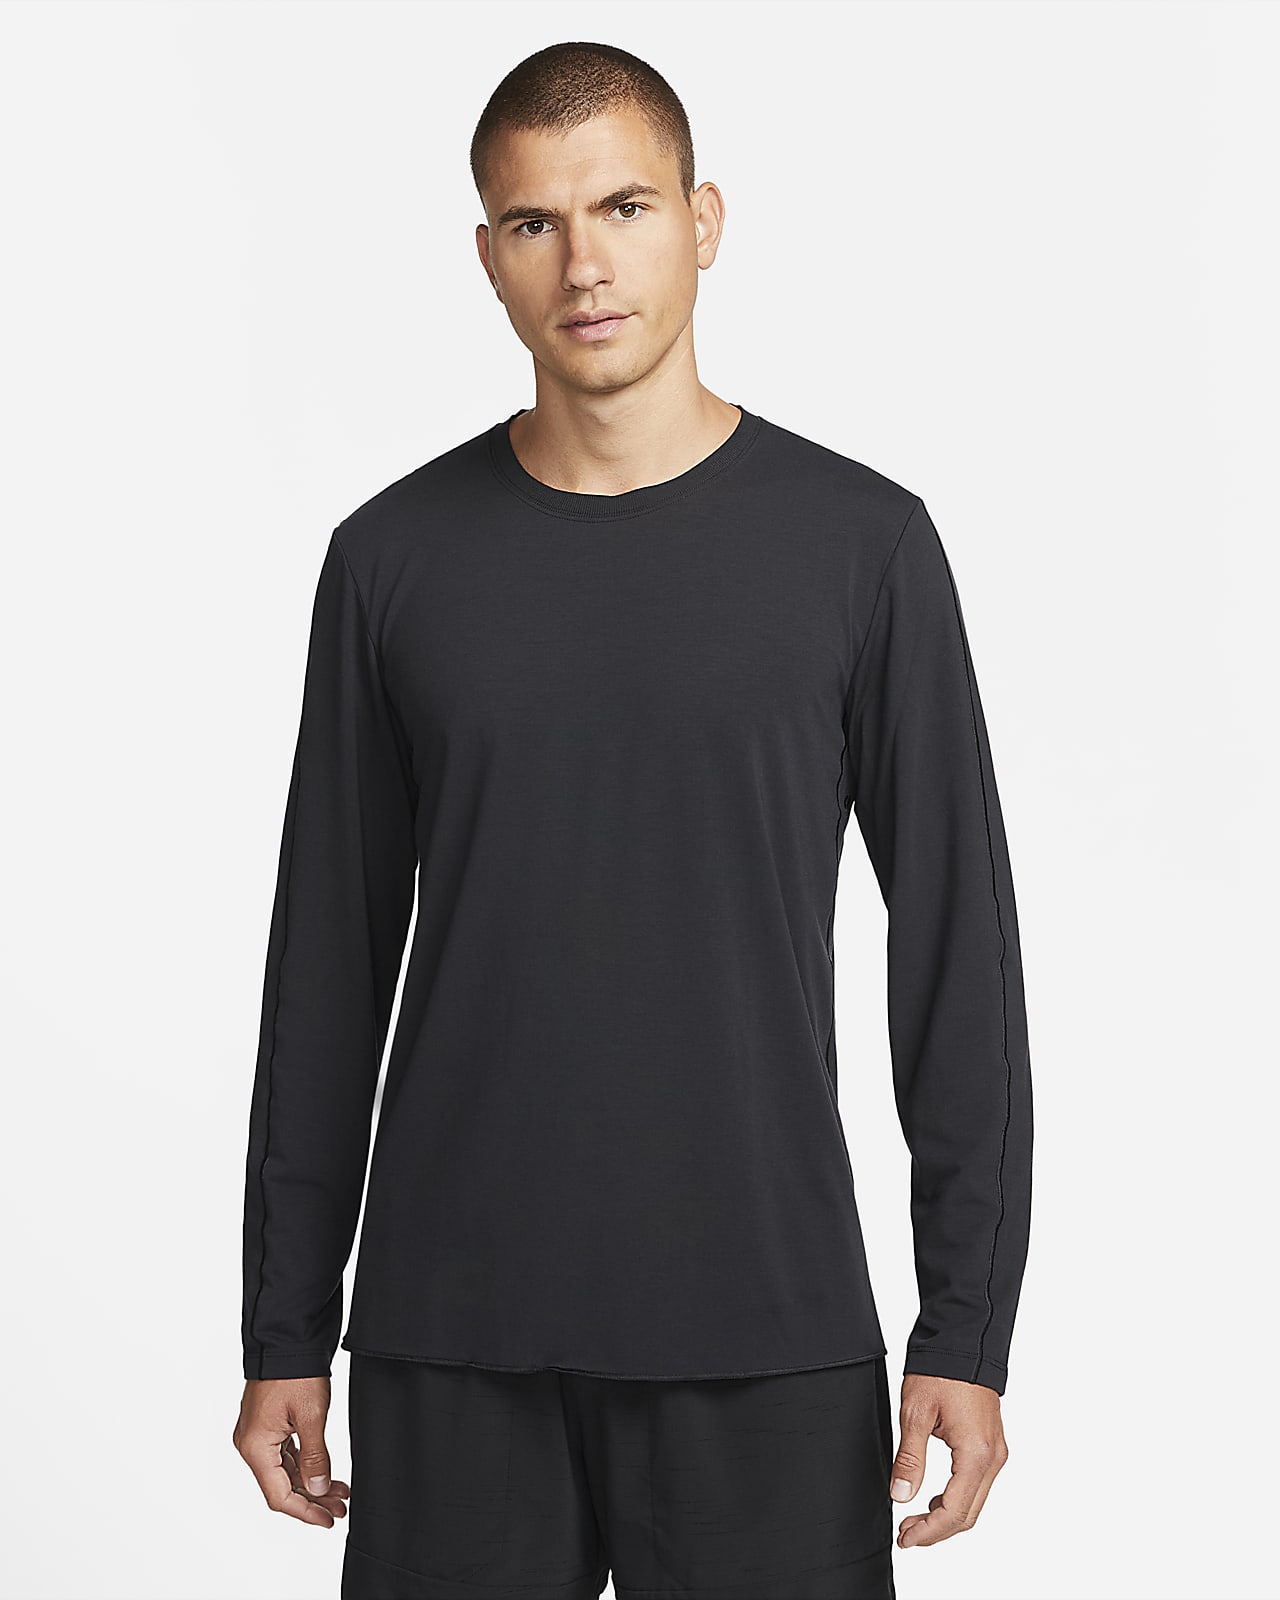 https://static.nike.com/a/images/t_PDP_1280_v1/f_auto,q_auto:eco/0a399684-789d-4ac0-a3d9-e624b7bcad43/dri-fit-yoga-mens-long-sleeve-top-ZpSzv1.png